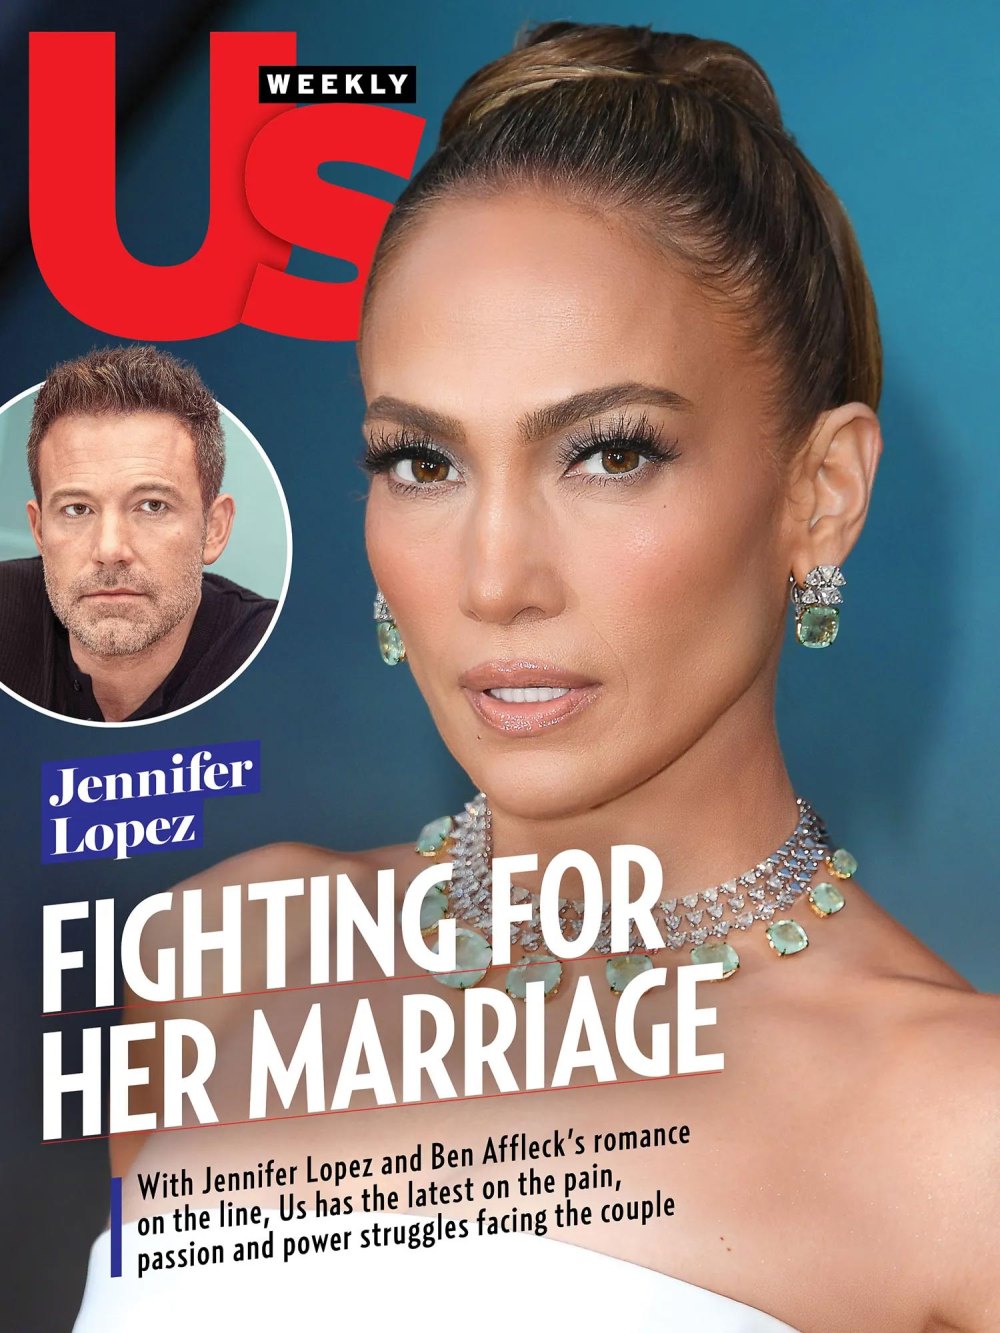 Jennifer Lopez and Ben Affleck's friends are divided over whether the marriage can be saved